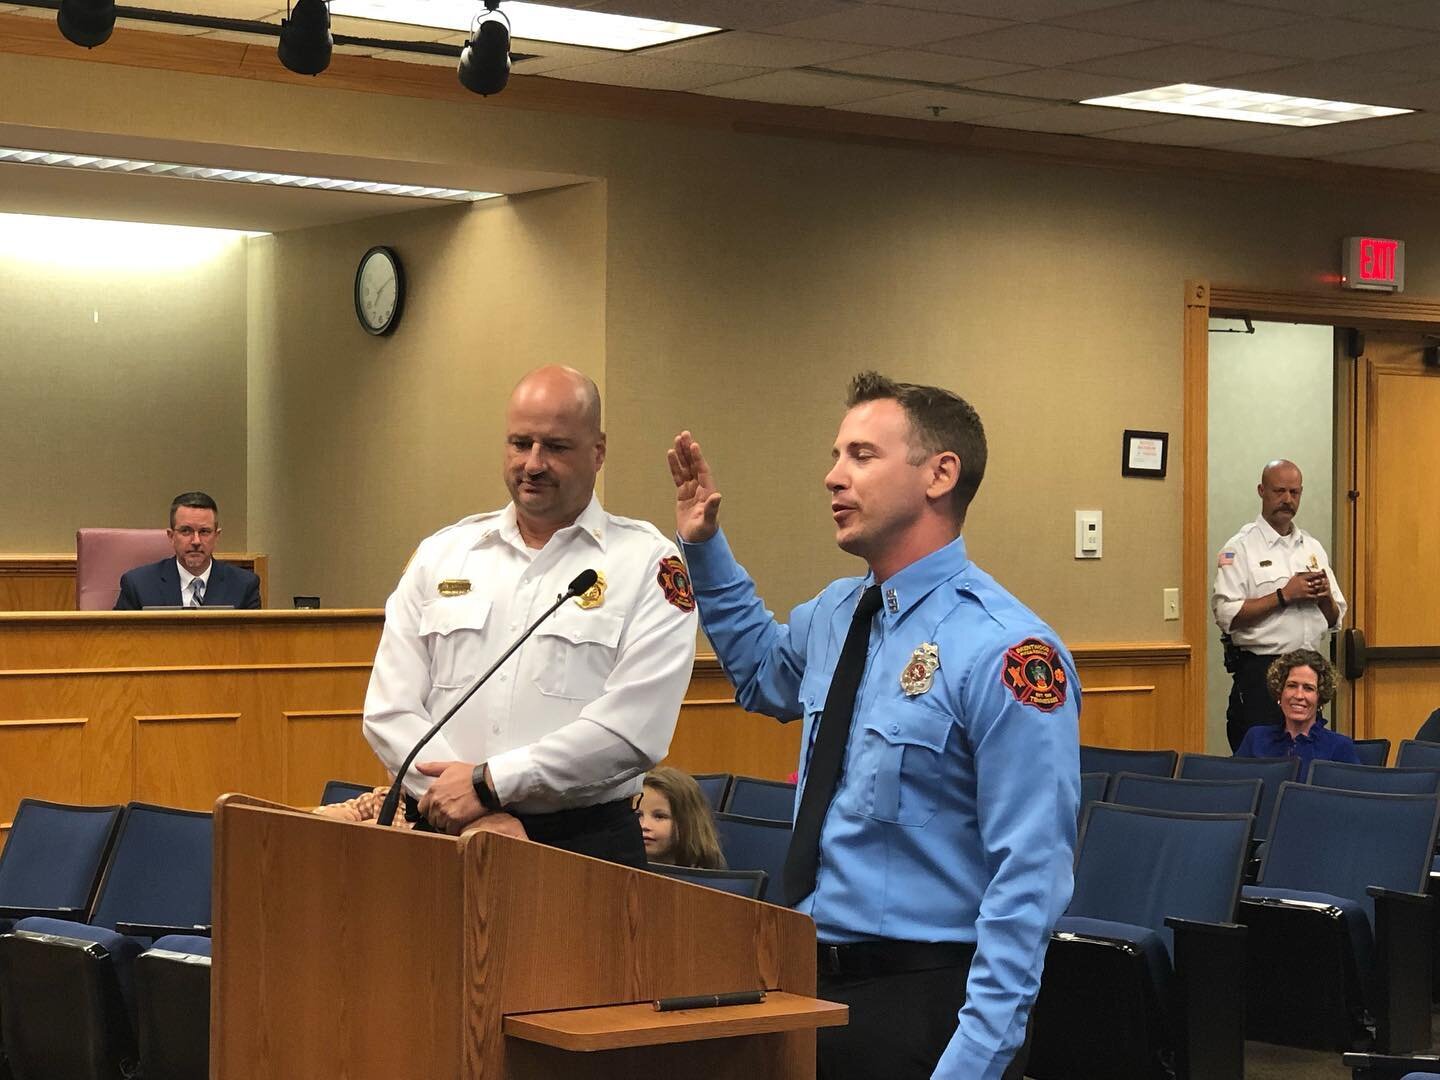 Tonight at the City Commission meeting we swore in 2 new police officers and one new firefighter. Please welcome Tanner Choate and Jamal Jones to BPD and Bo Teyler to BFD. We are so fortunate to have these first responders in Brentwood!